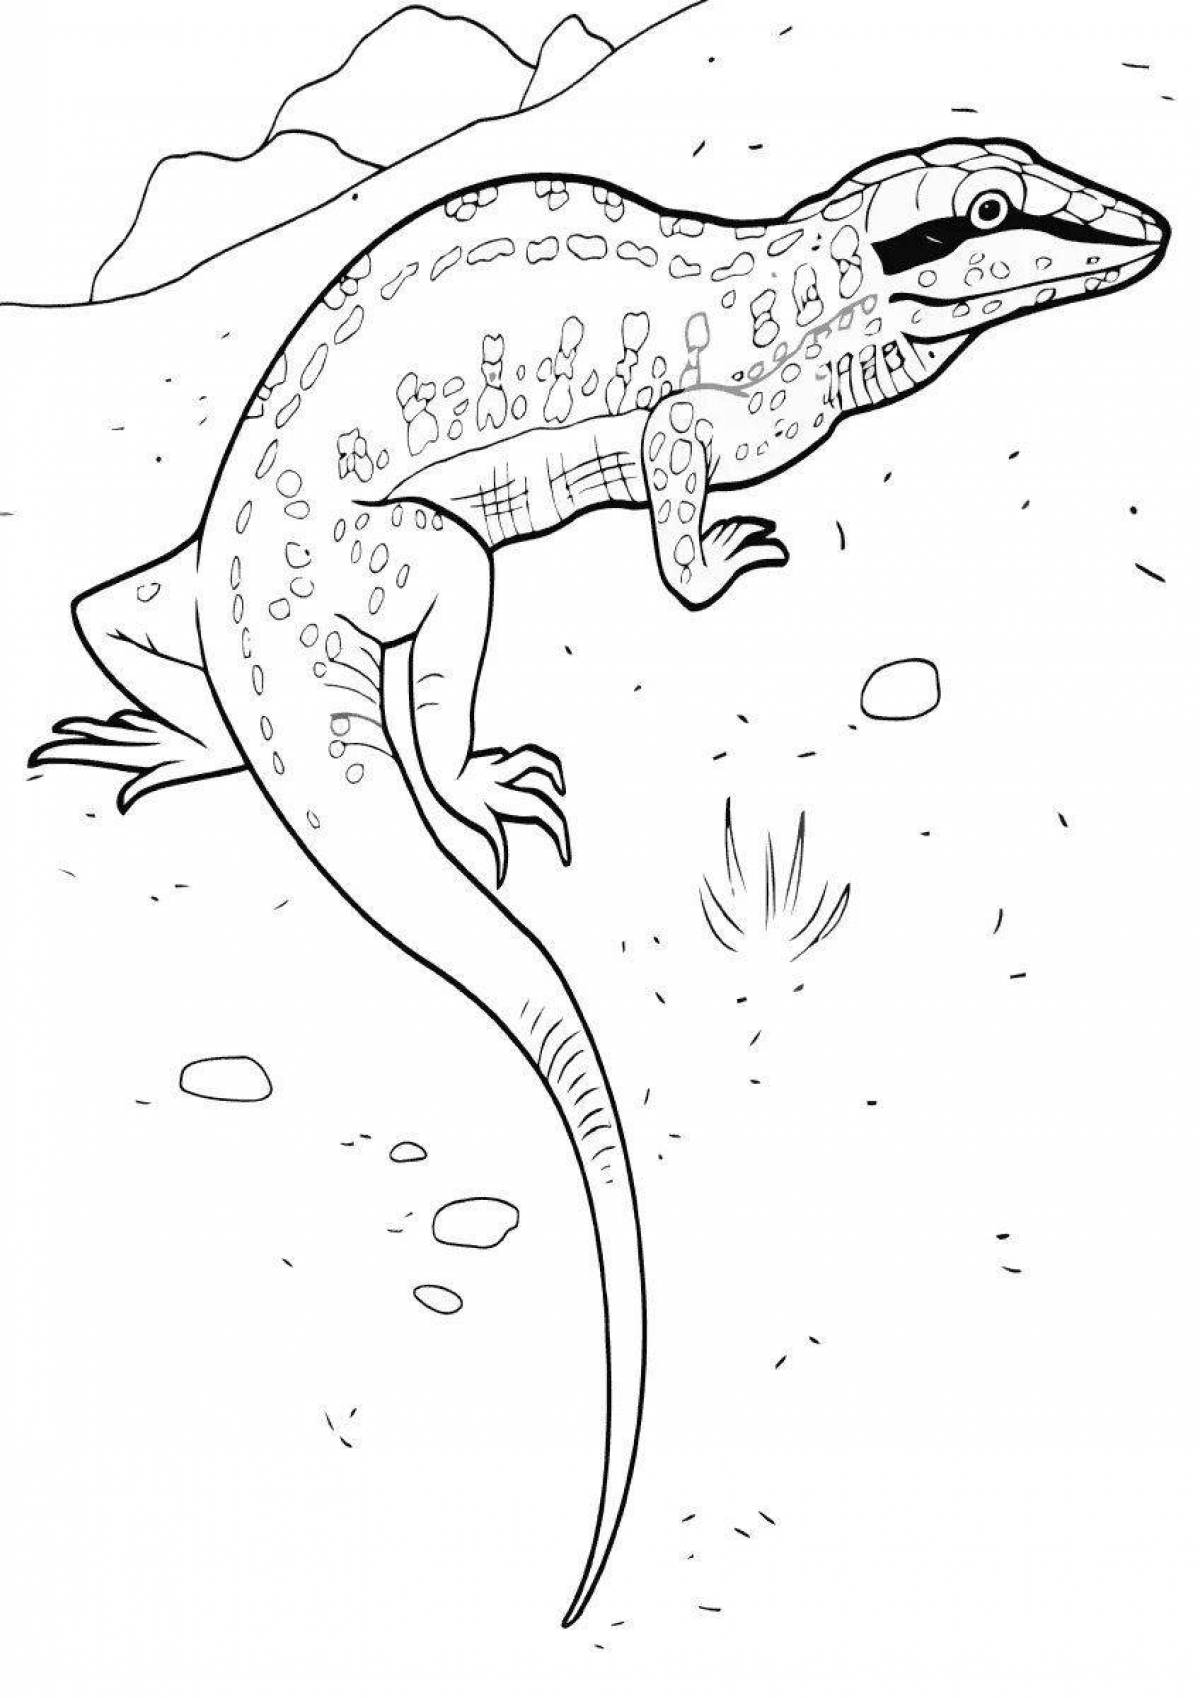 Fat monitor lizard coloring page